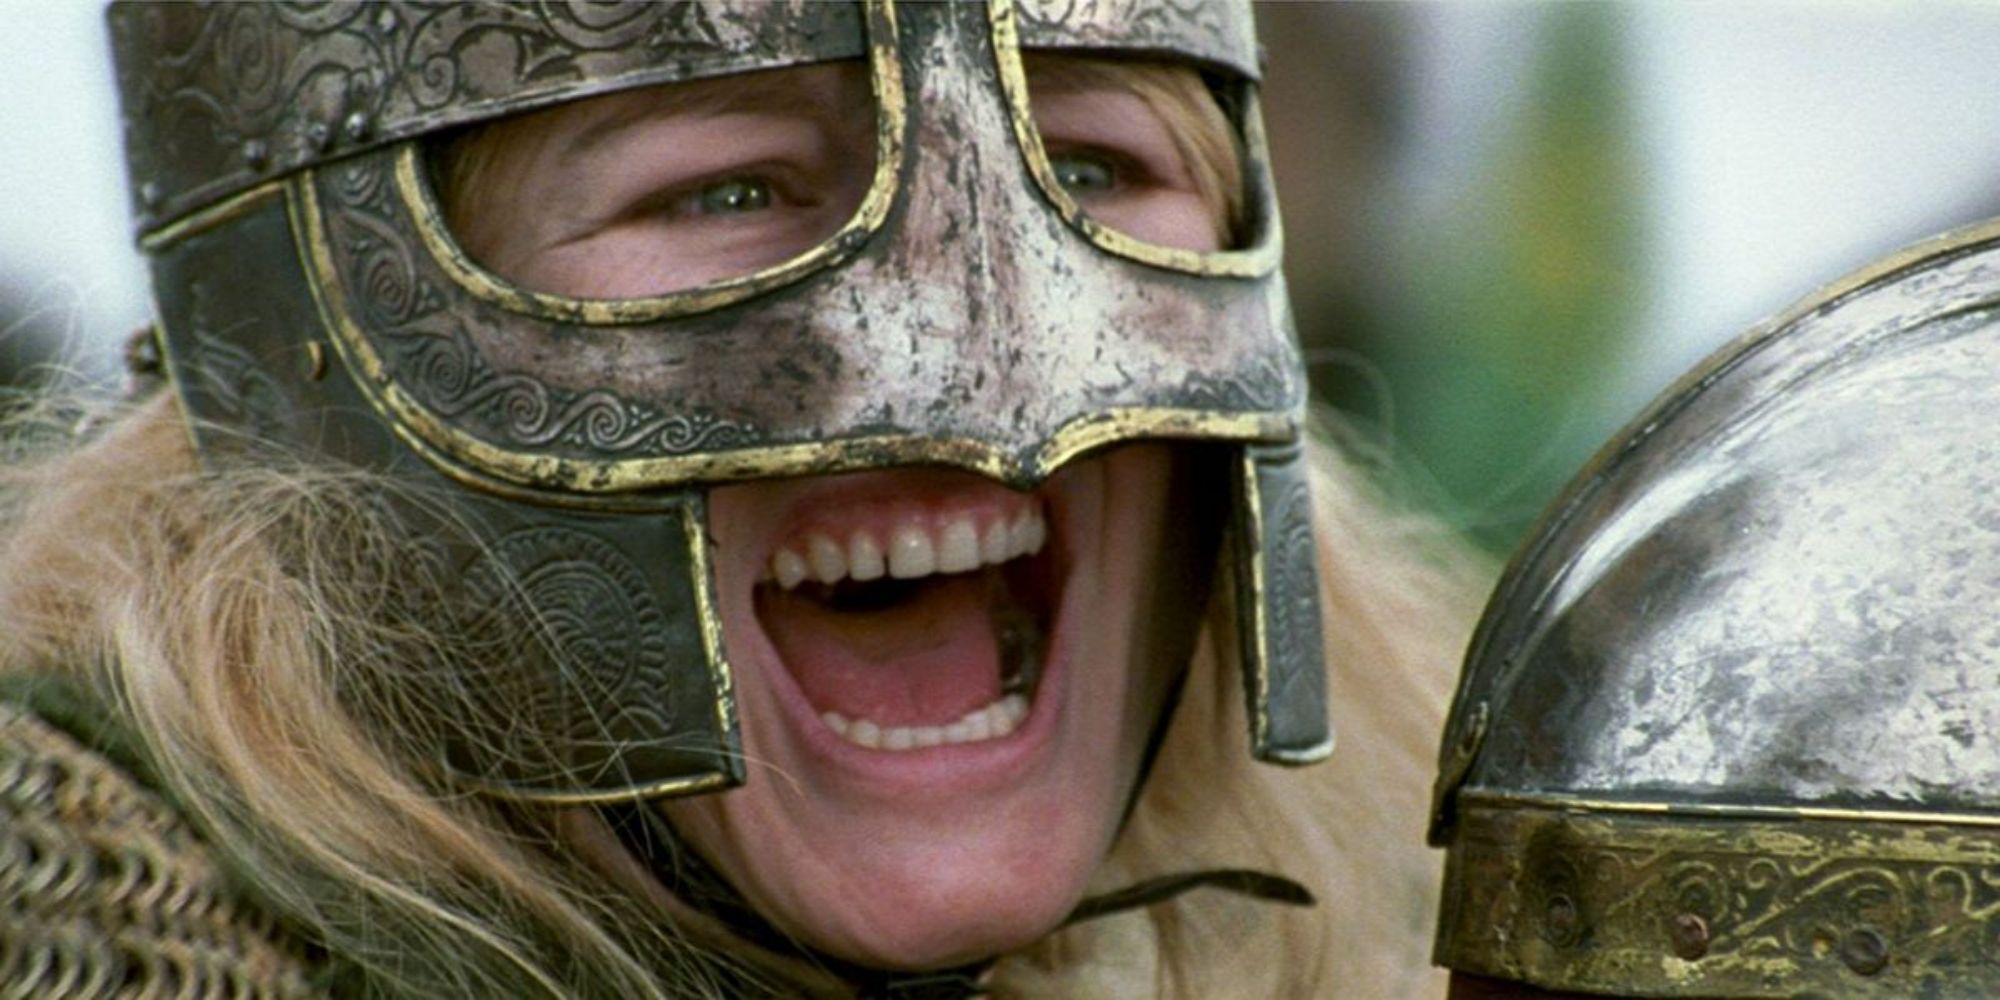 Miranda Otto as Eowyn screaming while wearing a helmet in The Lord of the Rings Return of the King (1)